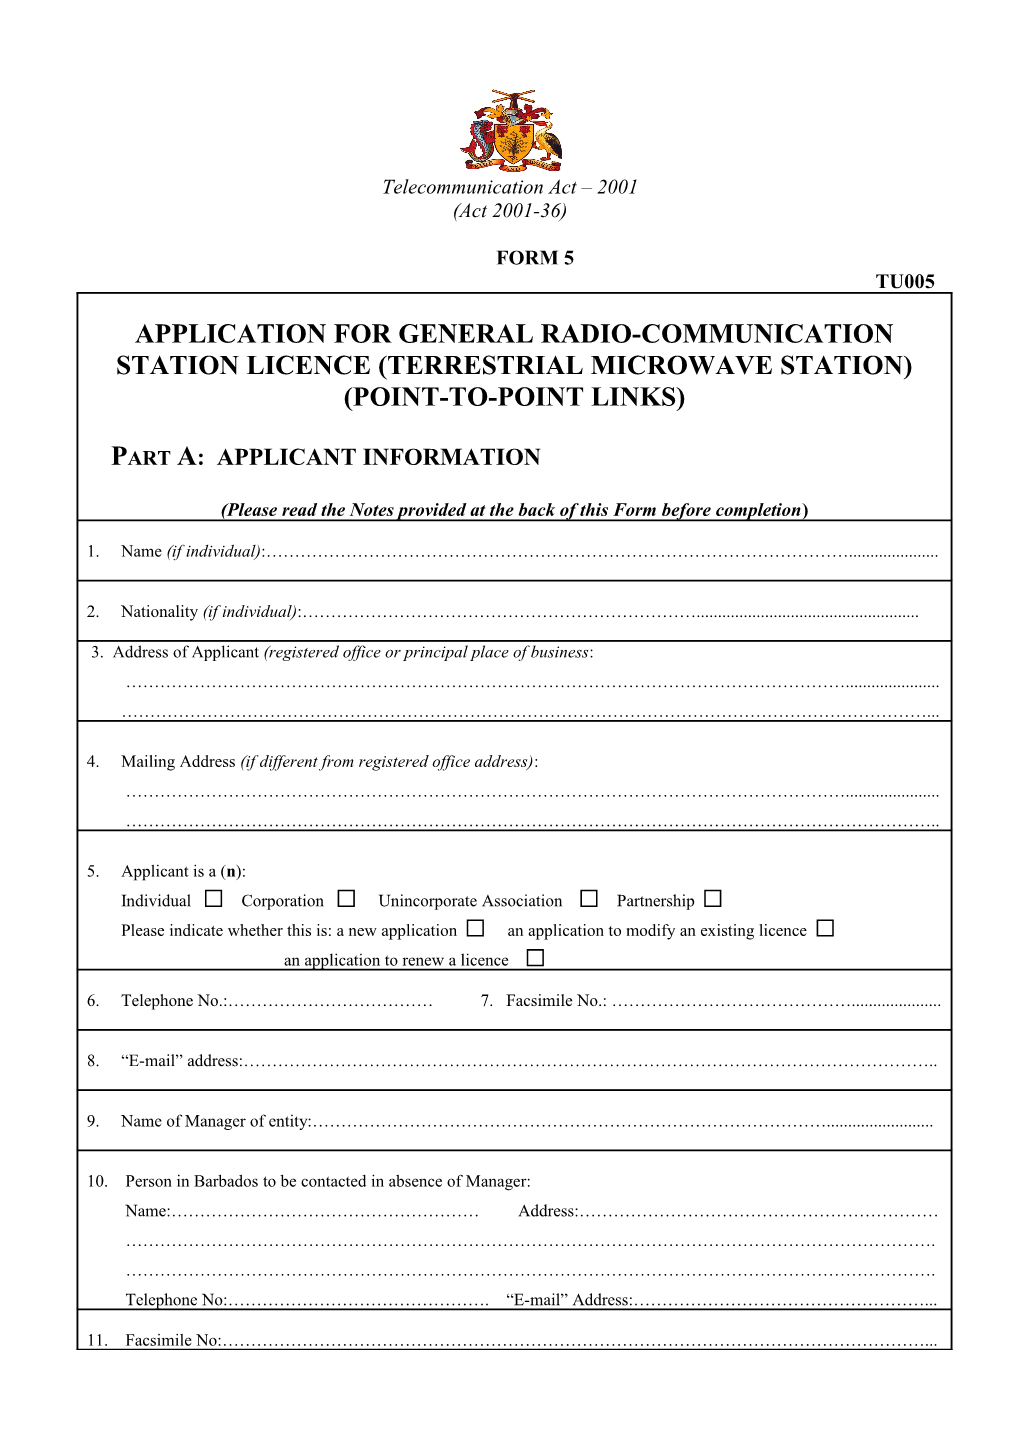 1.Guidelines Are Attached to This Application Form